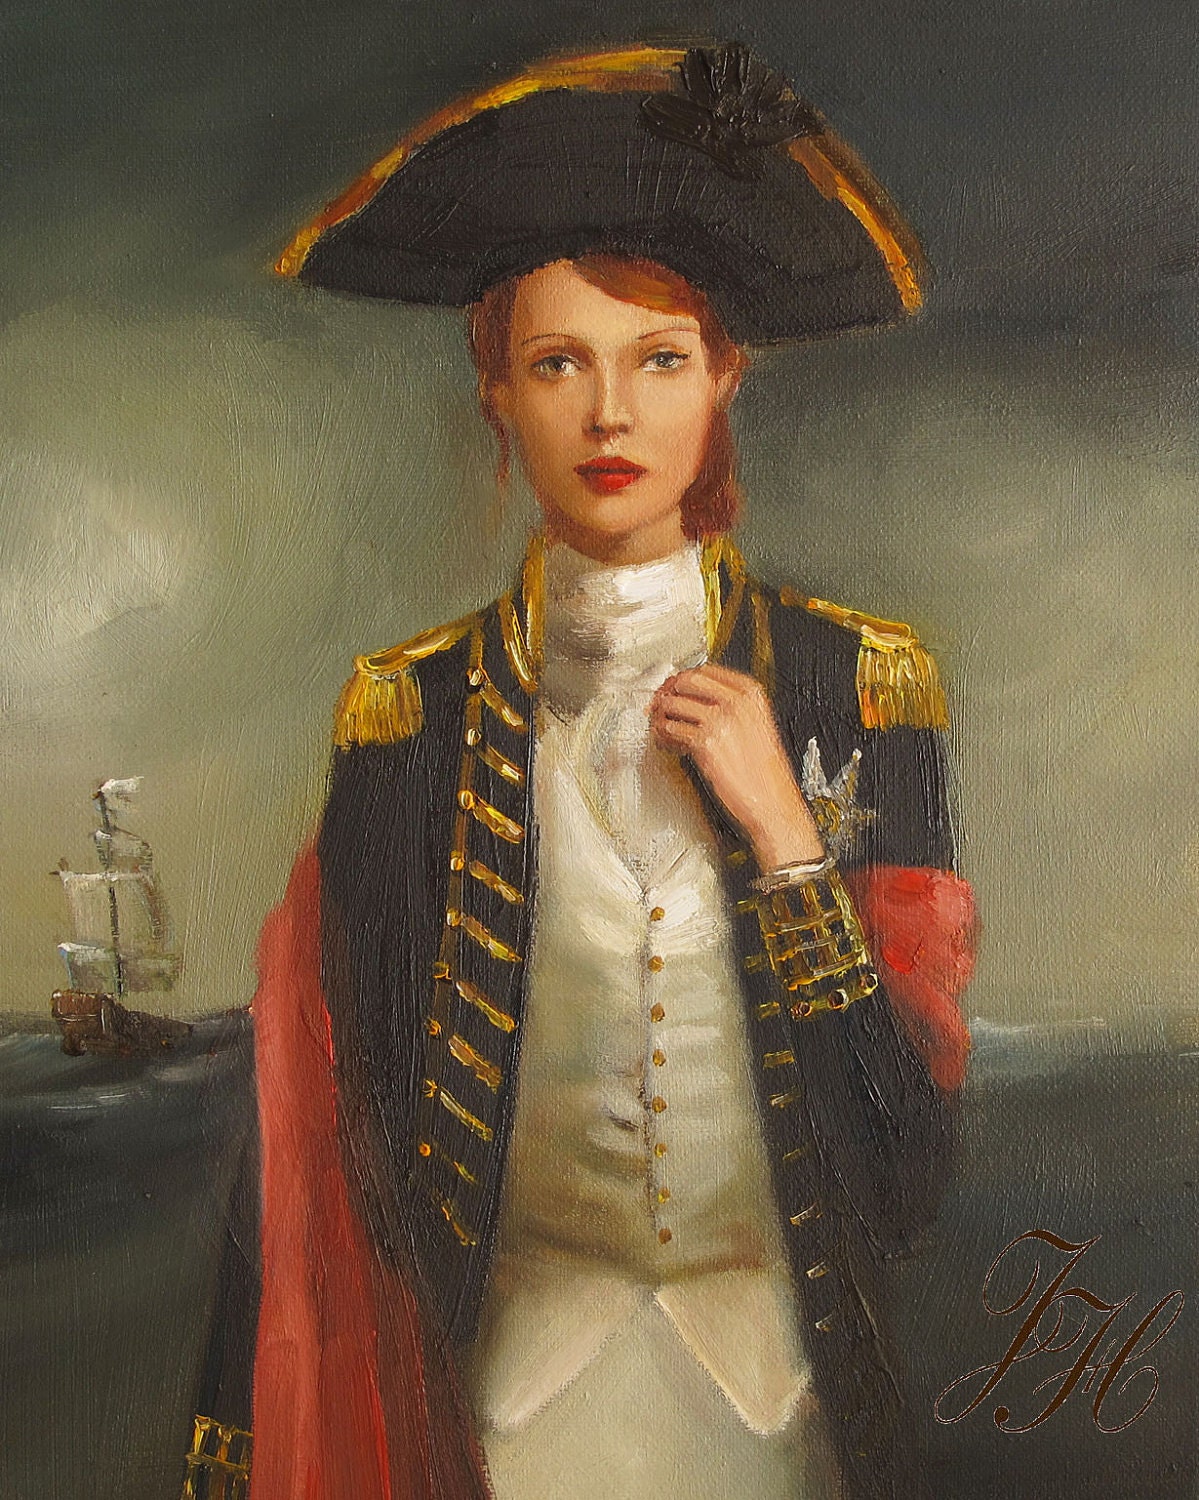 Portrait- Her Face Launched A Thousand Ships- Art Print - janethillstudio